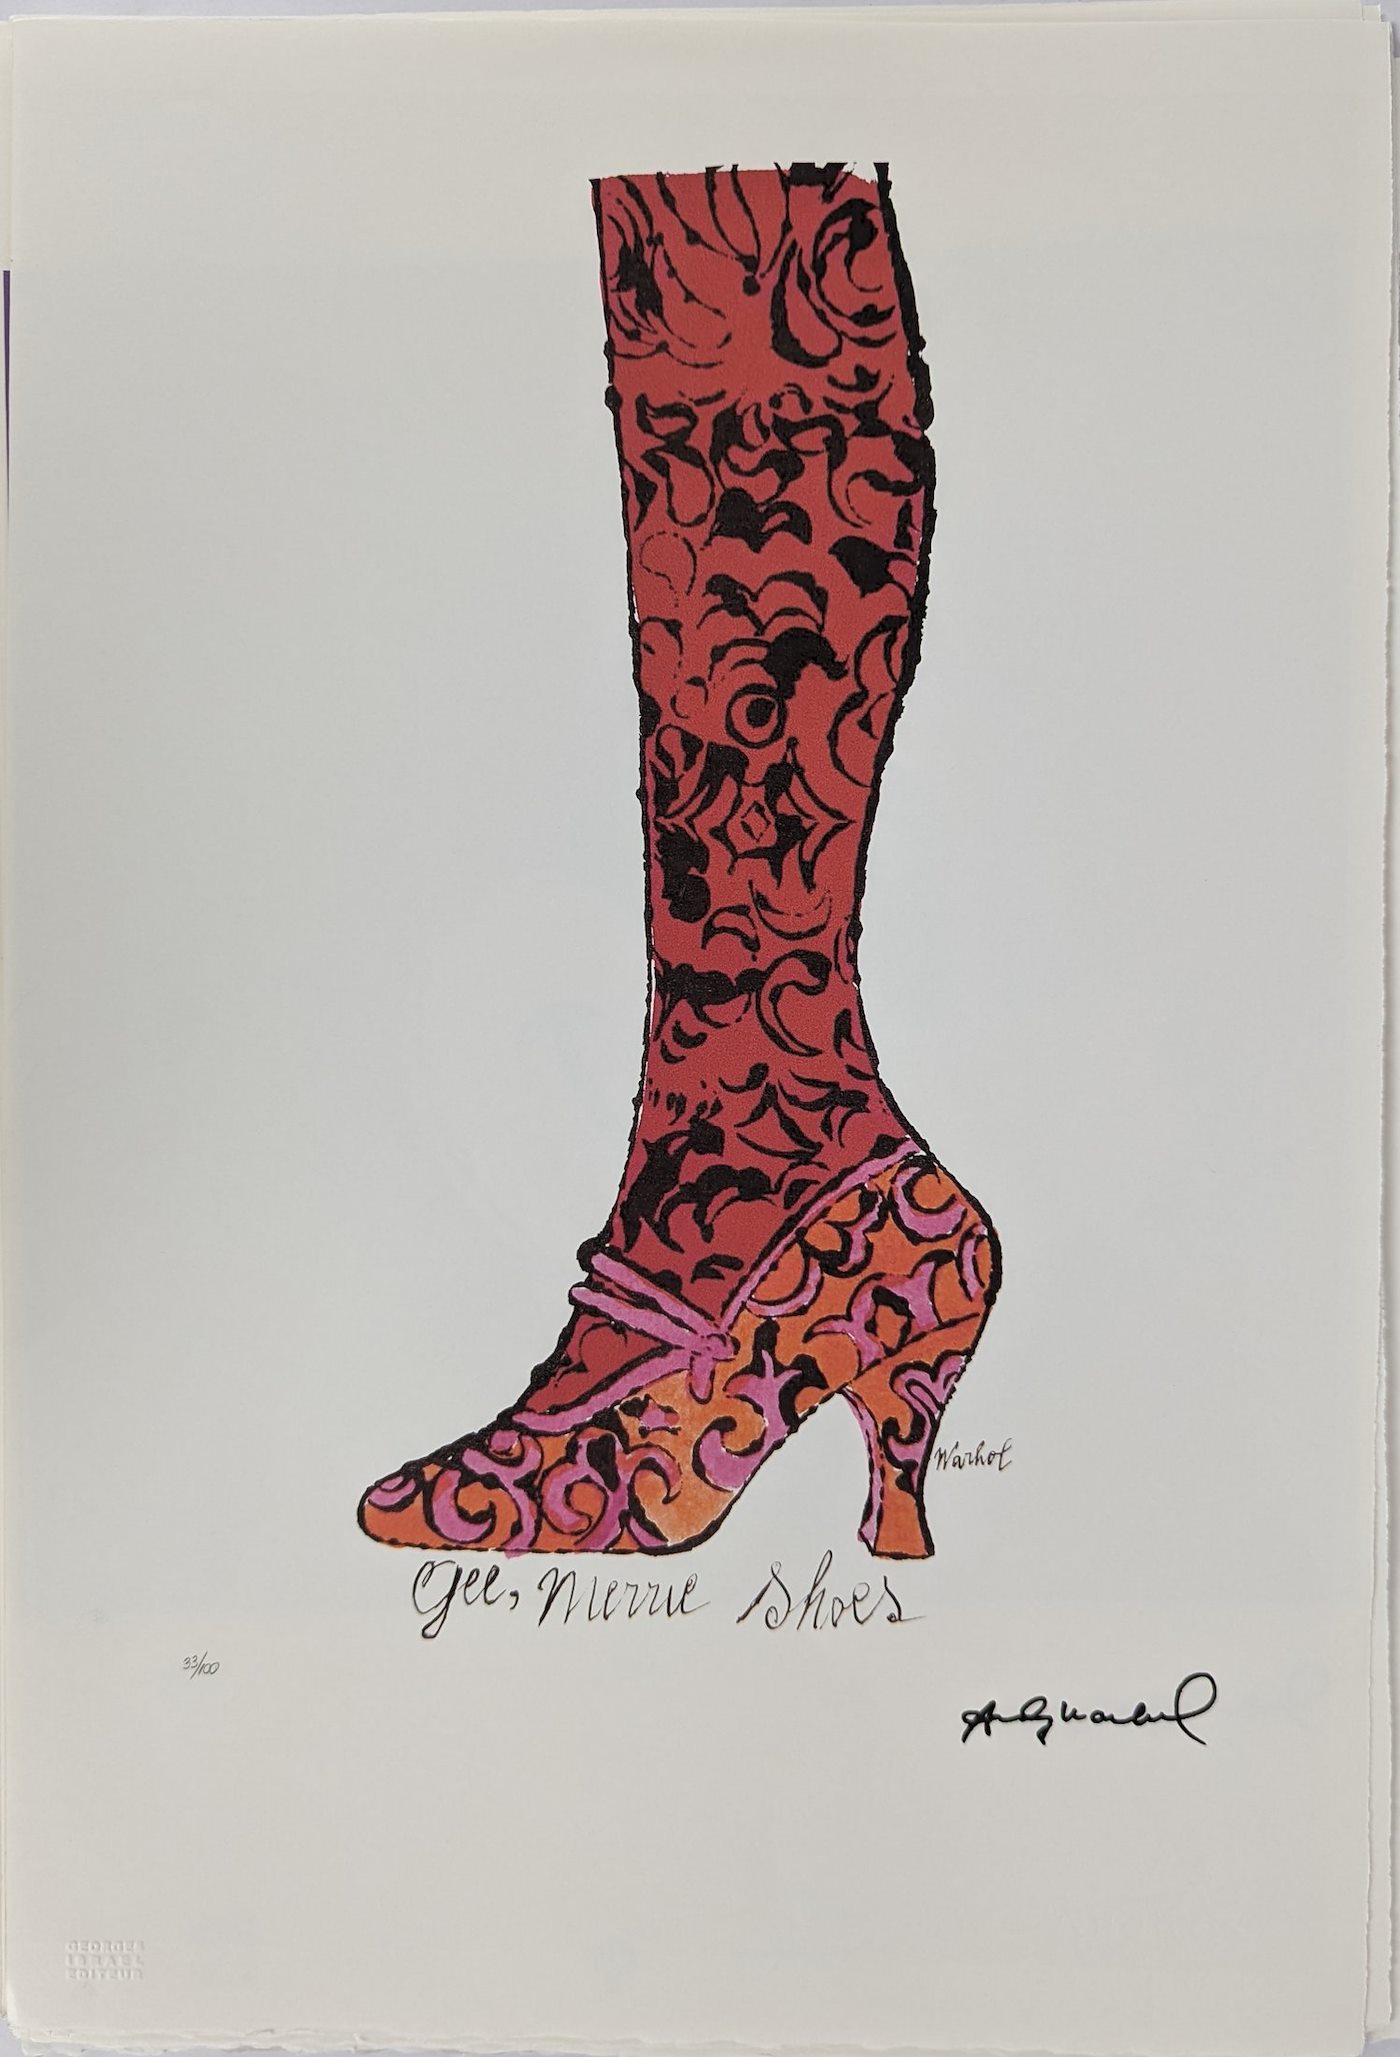 Andy Warhol - Merrie shoes